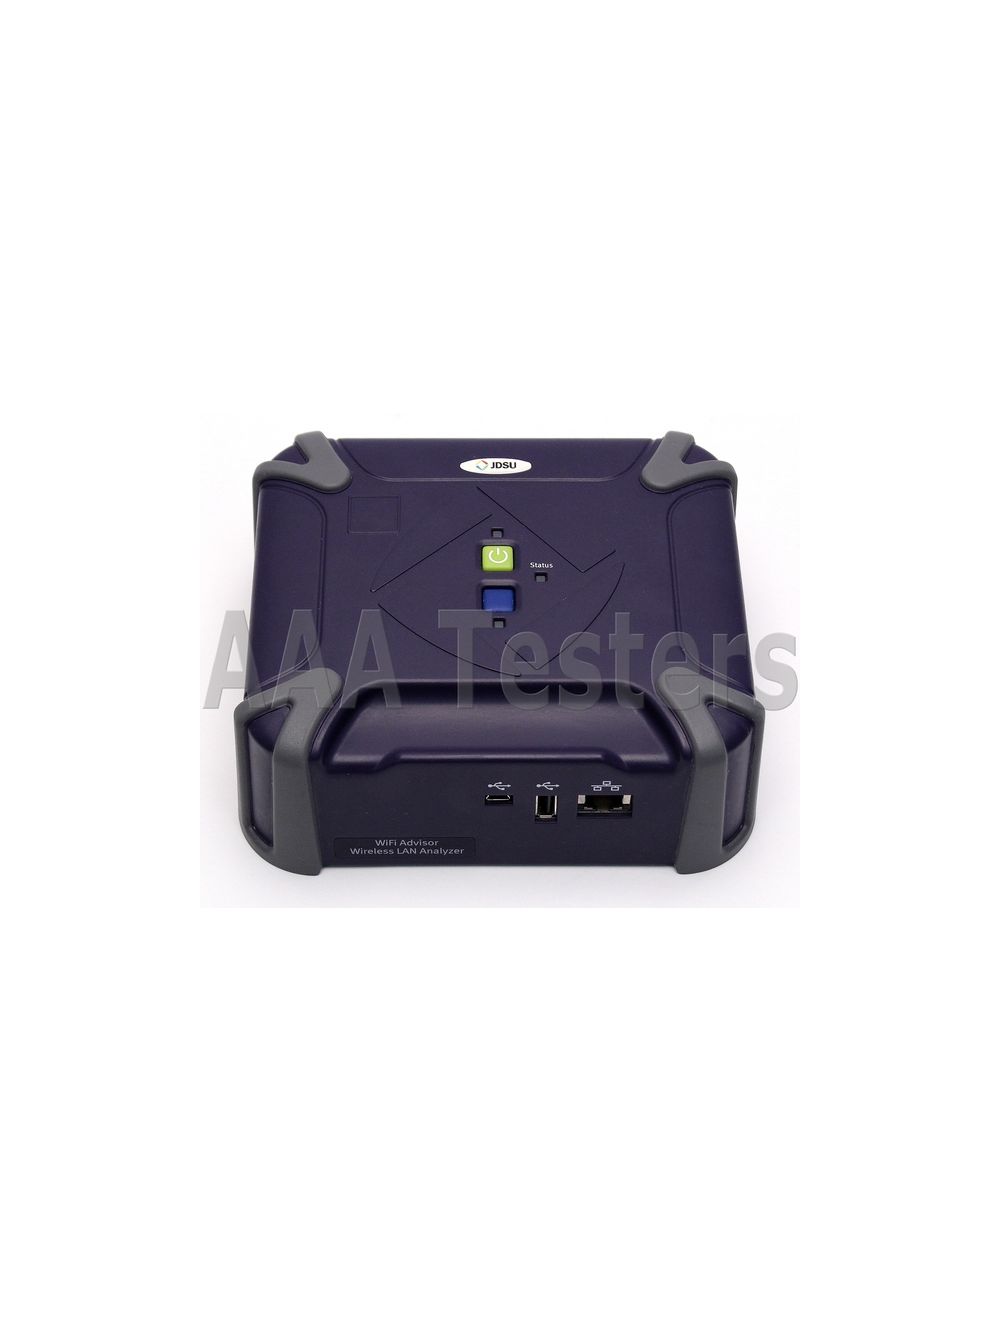 JDSU WFED-300AC WiFi Advisor with Carrying Case and Accessories  ***NEW*** 